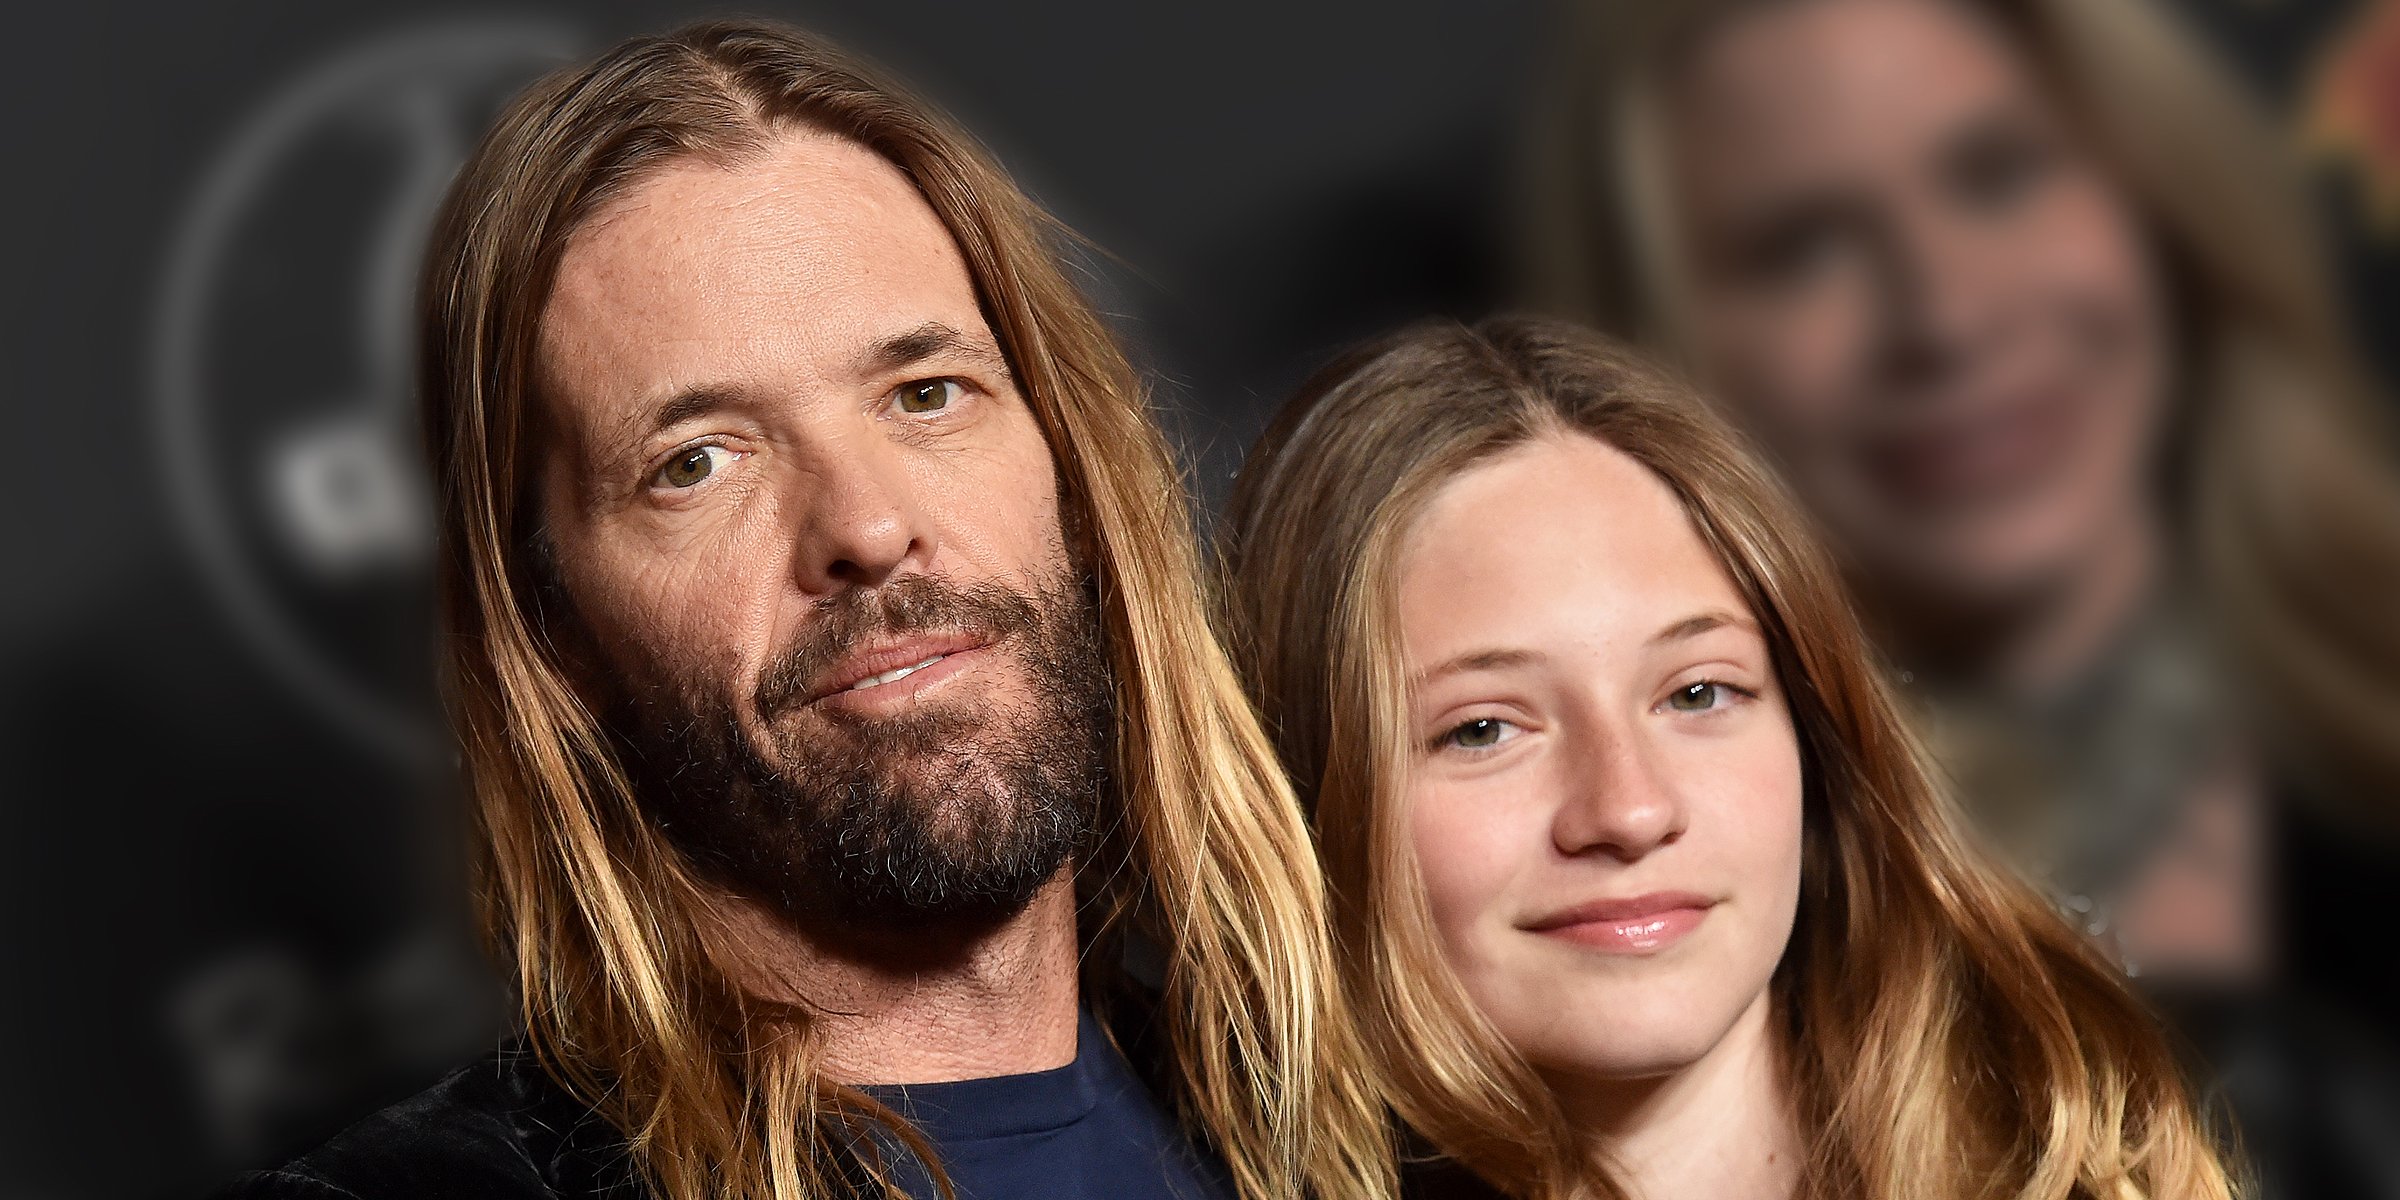 Taylor Hawkins and Annabelle Hawkins | Source: Getty Images